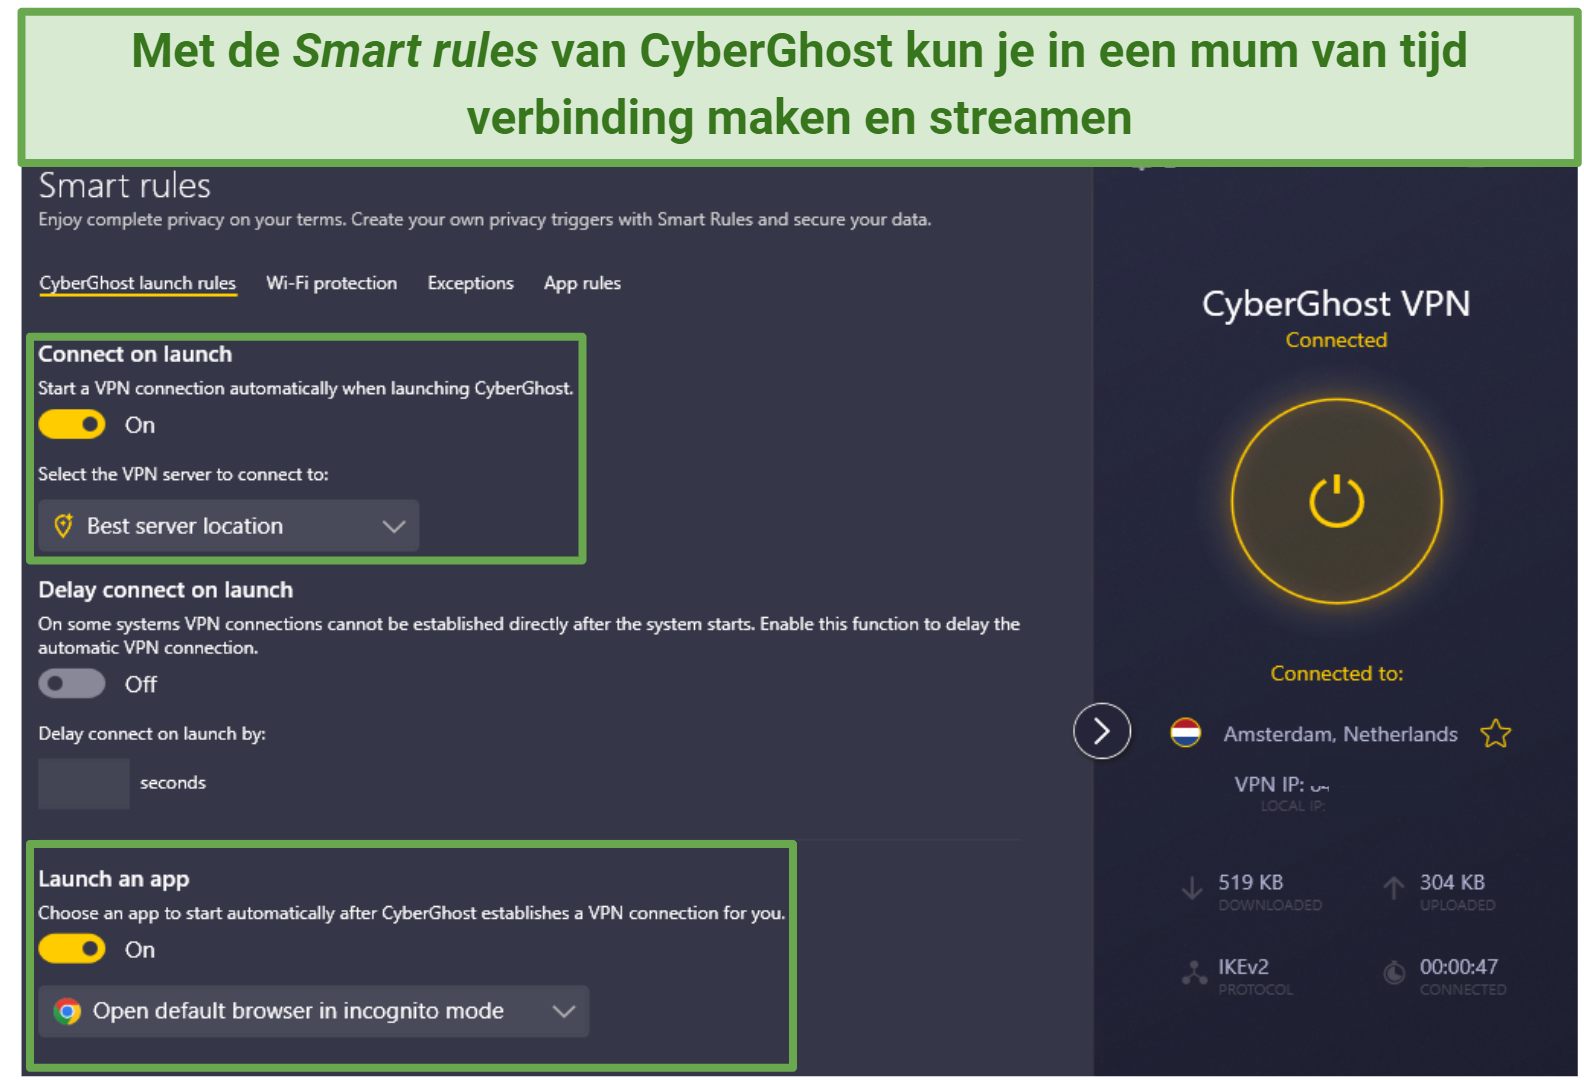 A screenshot showing CyberGhost's Smart rules set to connect to the best available server in the Netherlands for streaming Videoland